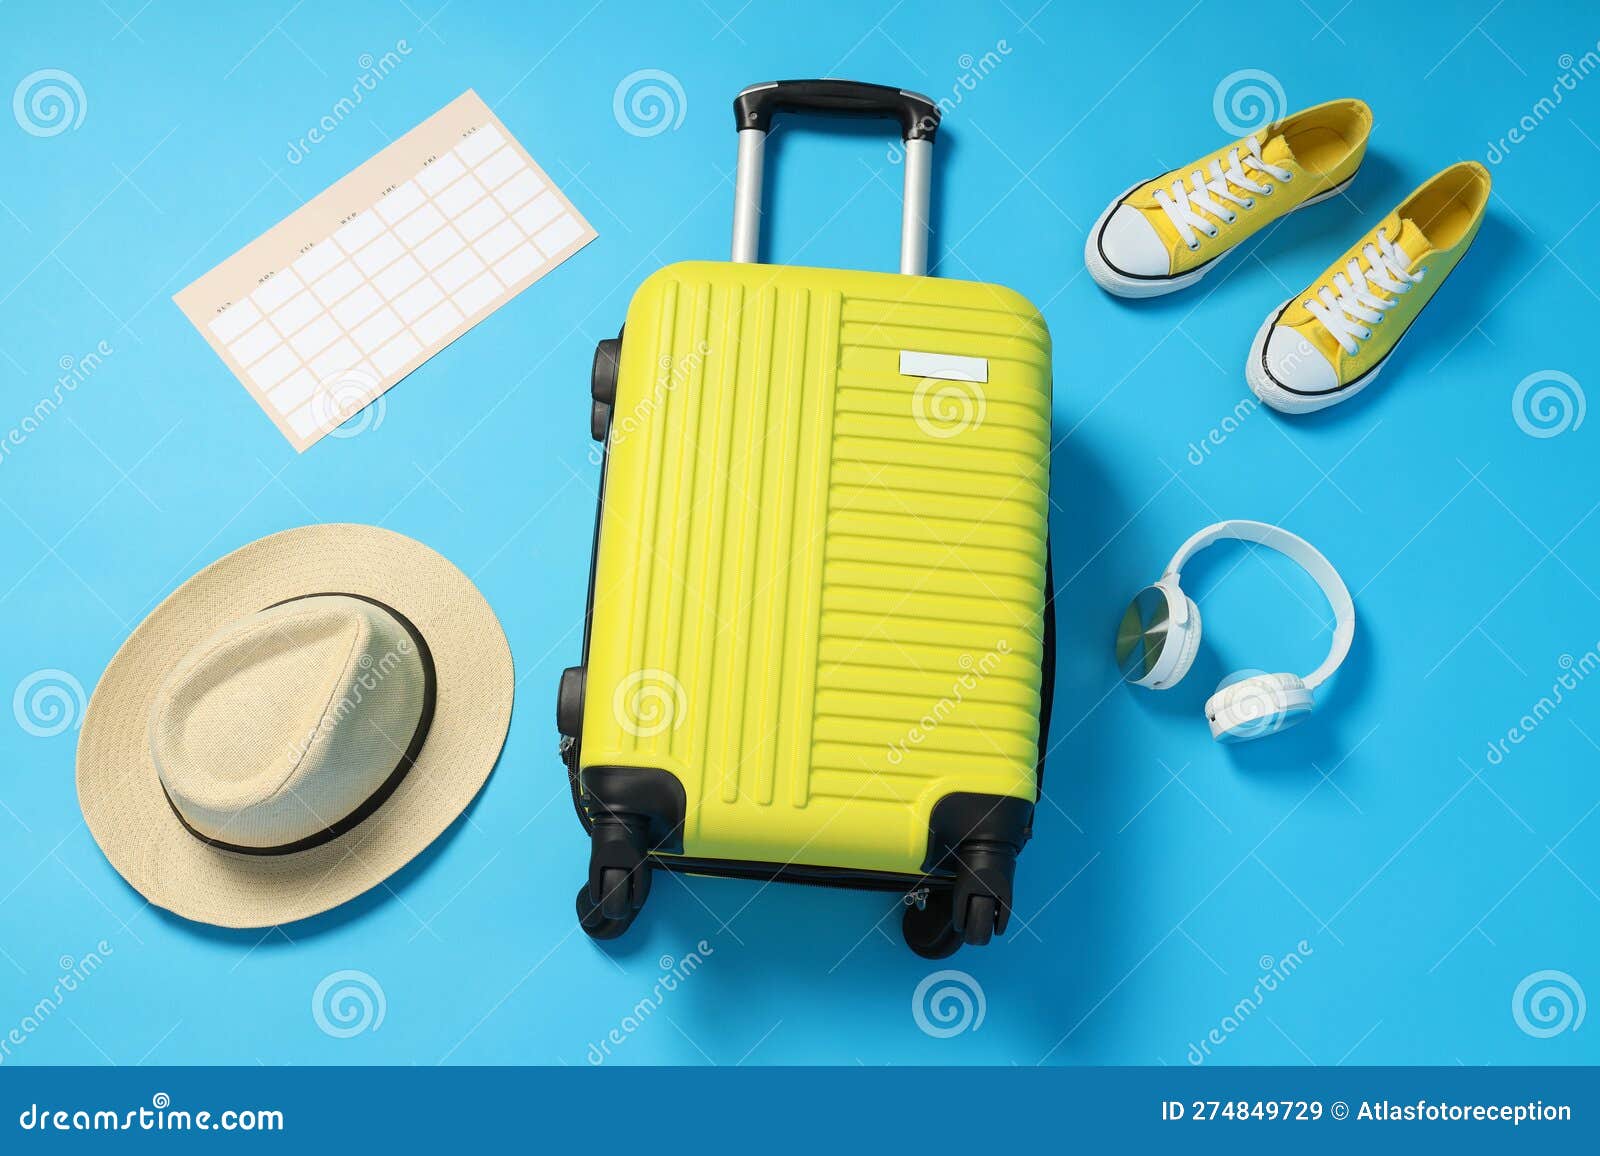 Travel and Vacation, Holidays, Composition with Suitcase Stock Image